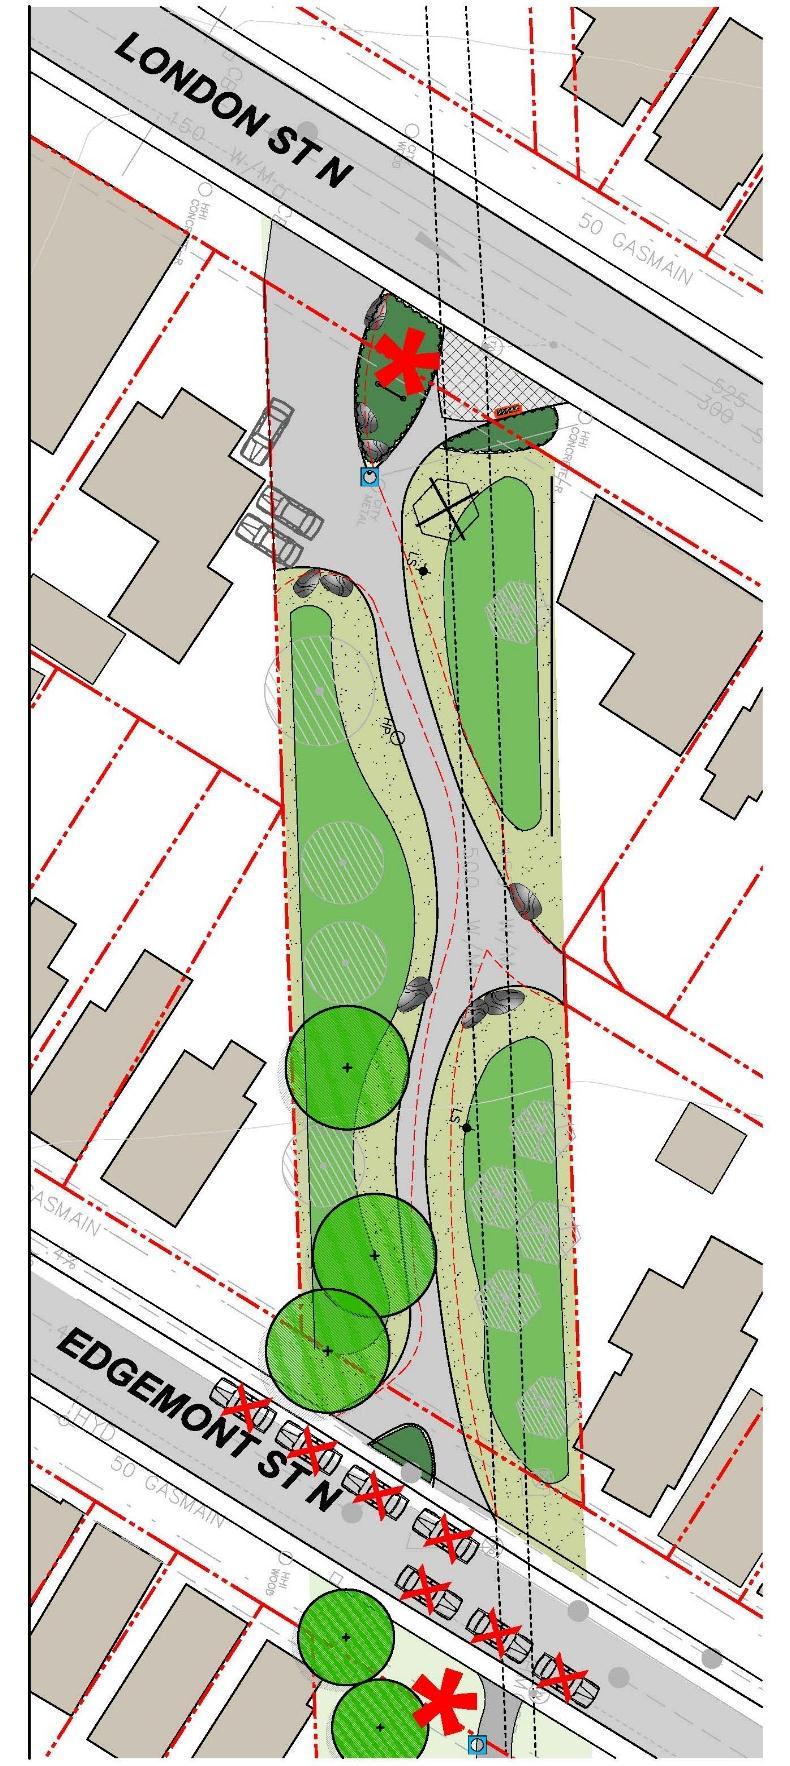 PROPOSED IMPROVEMENTS CREATE A SEPARATE PEDESTRIAN ENTRANCE MOW STRIP DECORATIVE PRIVACY FENCING EXISTING CONDITIONS (DASHED RED LINE) Parking Recommendations REMOVED DISEASED TREE SOD